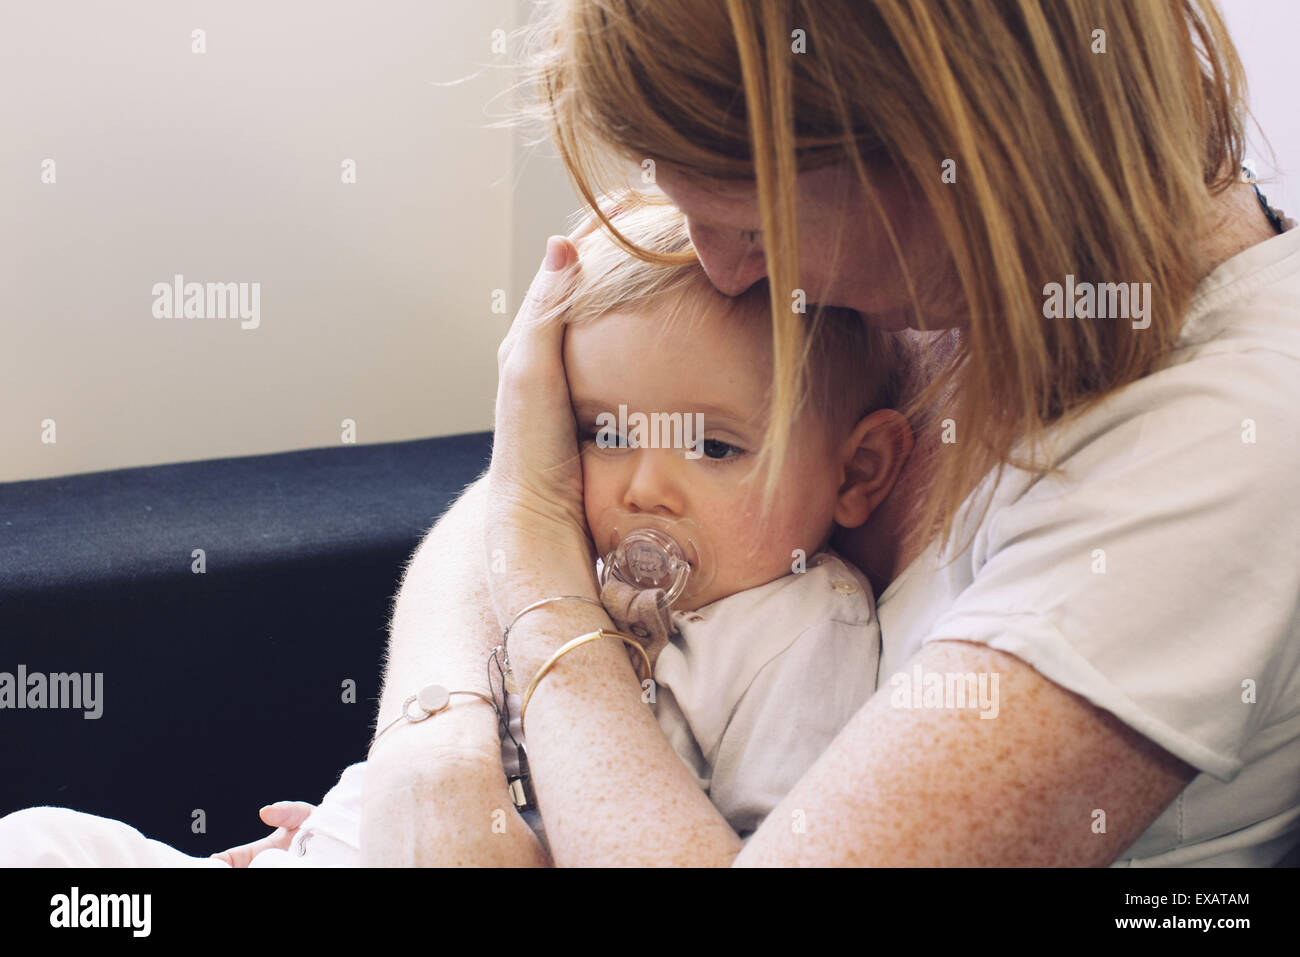 Mother holding infant on lap Stock Photo